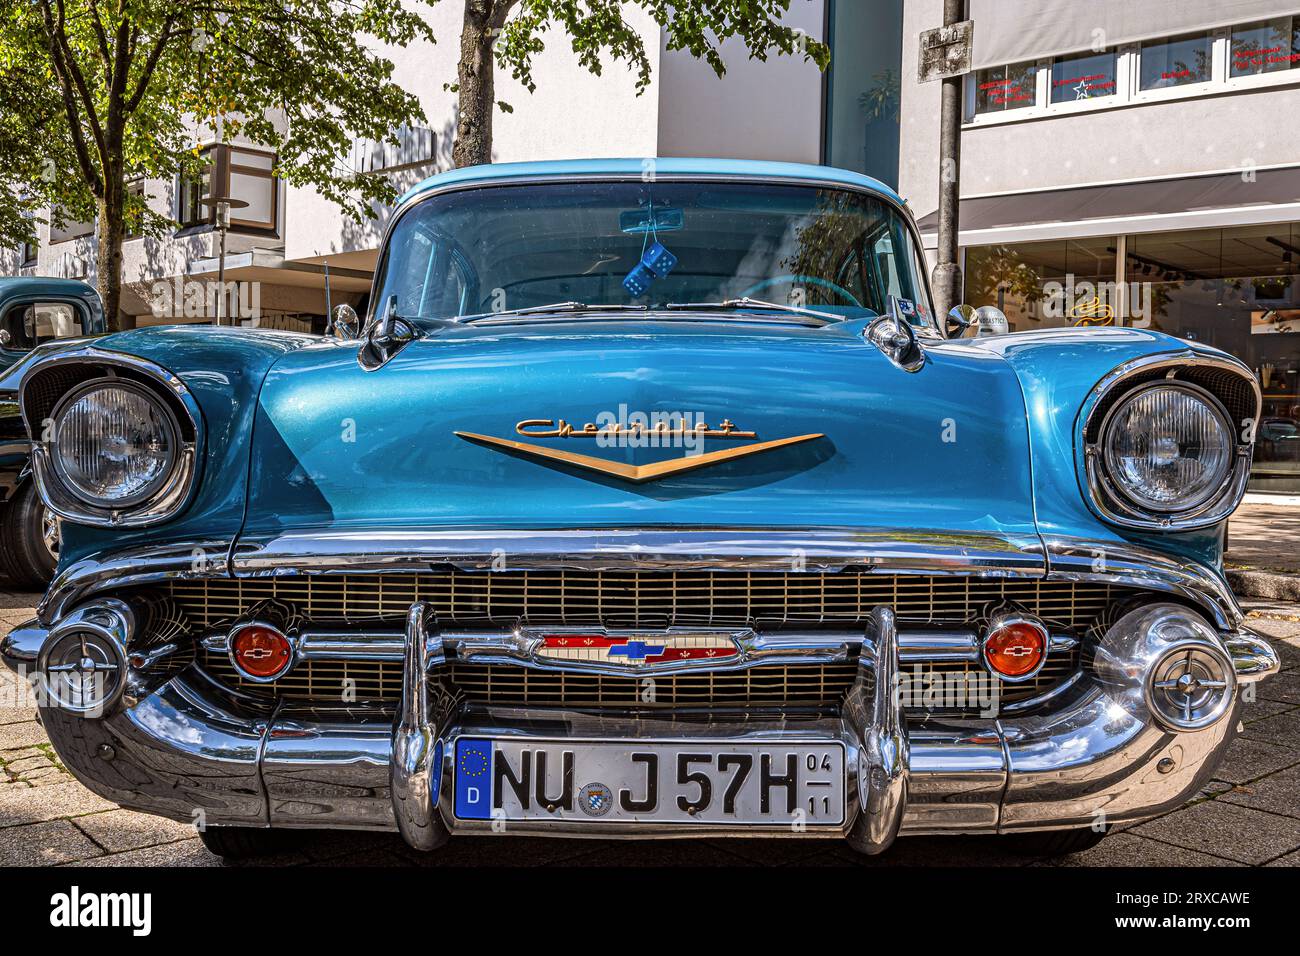 BADERN-WUERTTEMBERG : CHEVROLET Banque D'Images